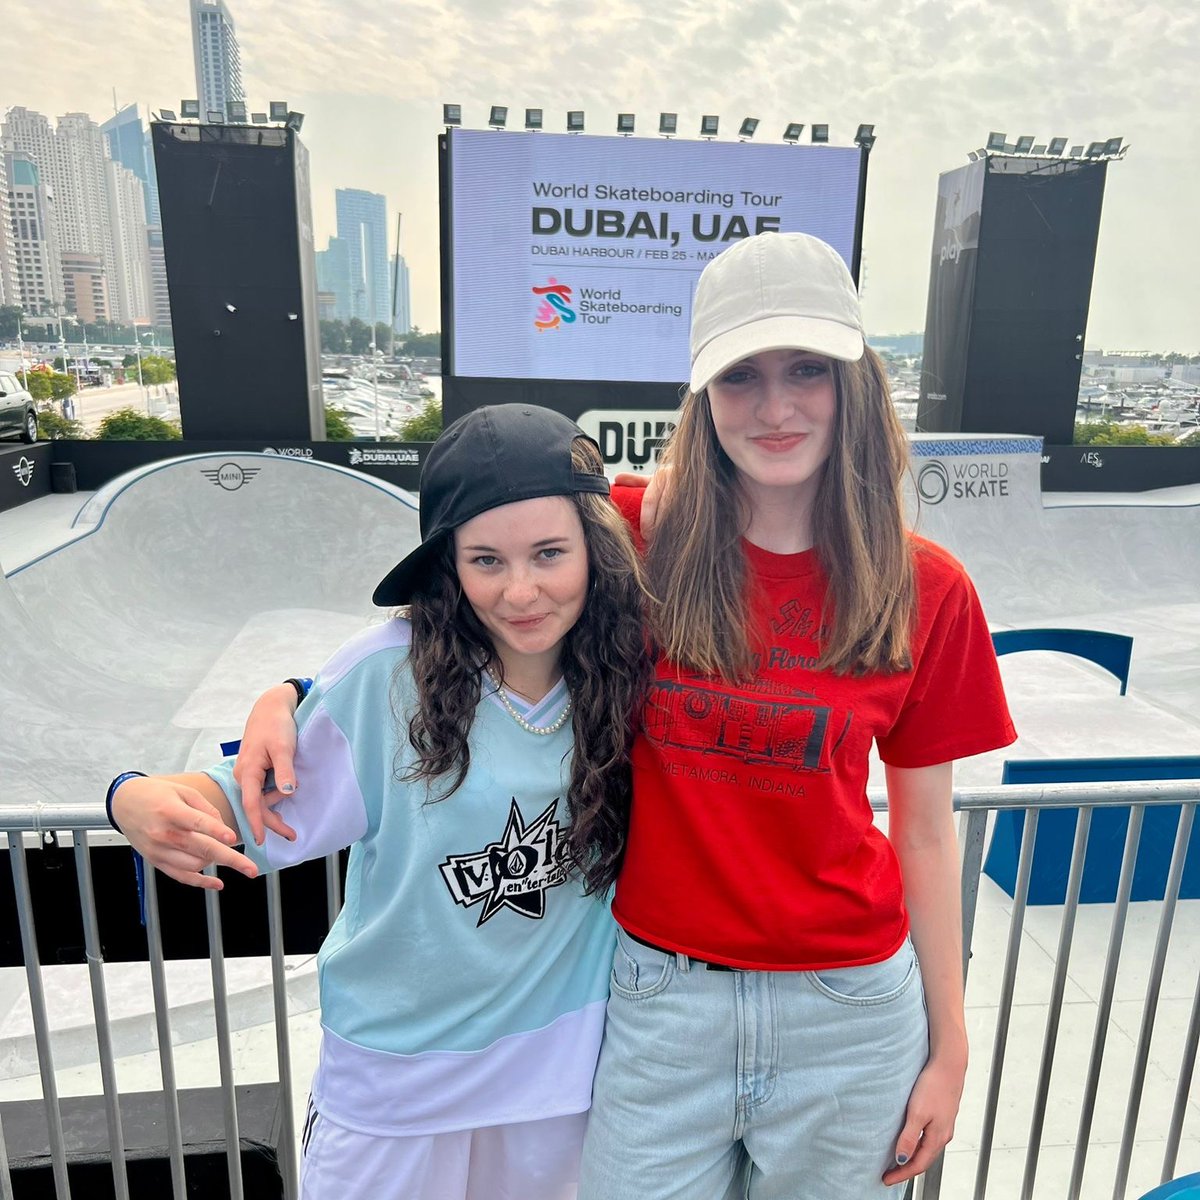 A huge congratulations to Skateboard GB team riders Lilly Strachan & Lola Tambling, who have got themselves through the notorious World Skate World Skateboarding Tour qualifiers and straight into the quarterfinals! More updates to follow! #RoadToParis2024 #OlympicSkateboarding